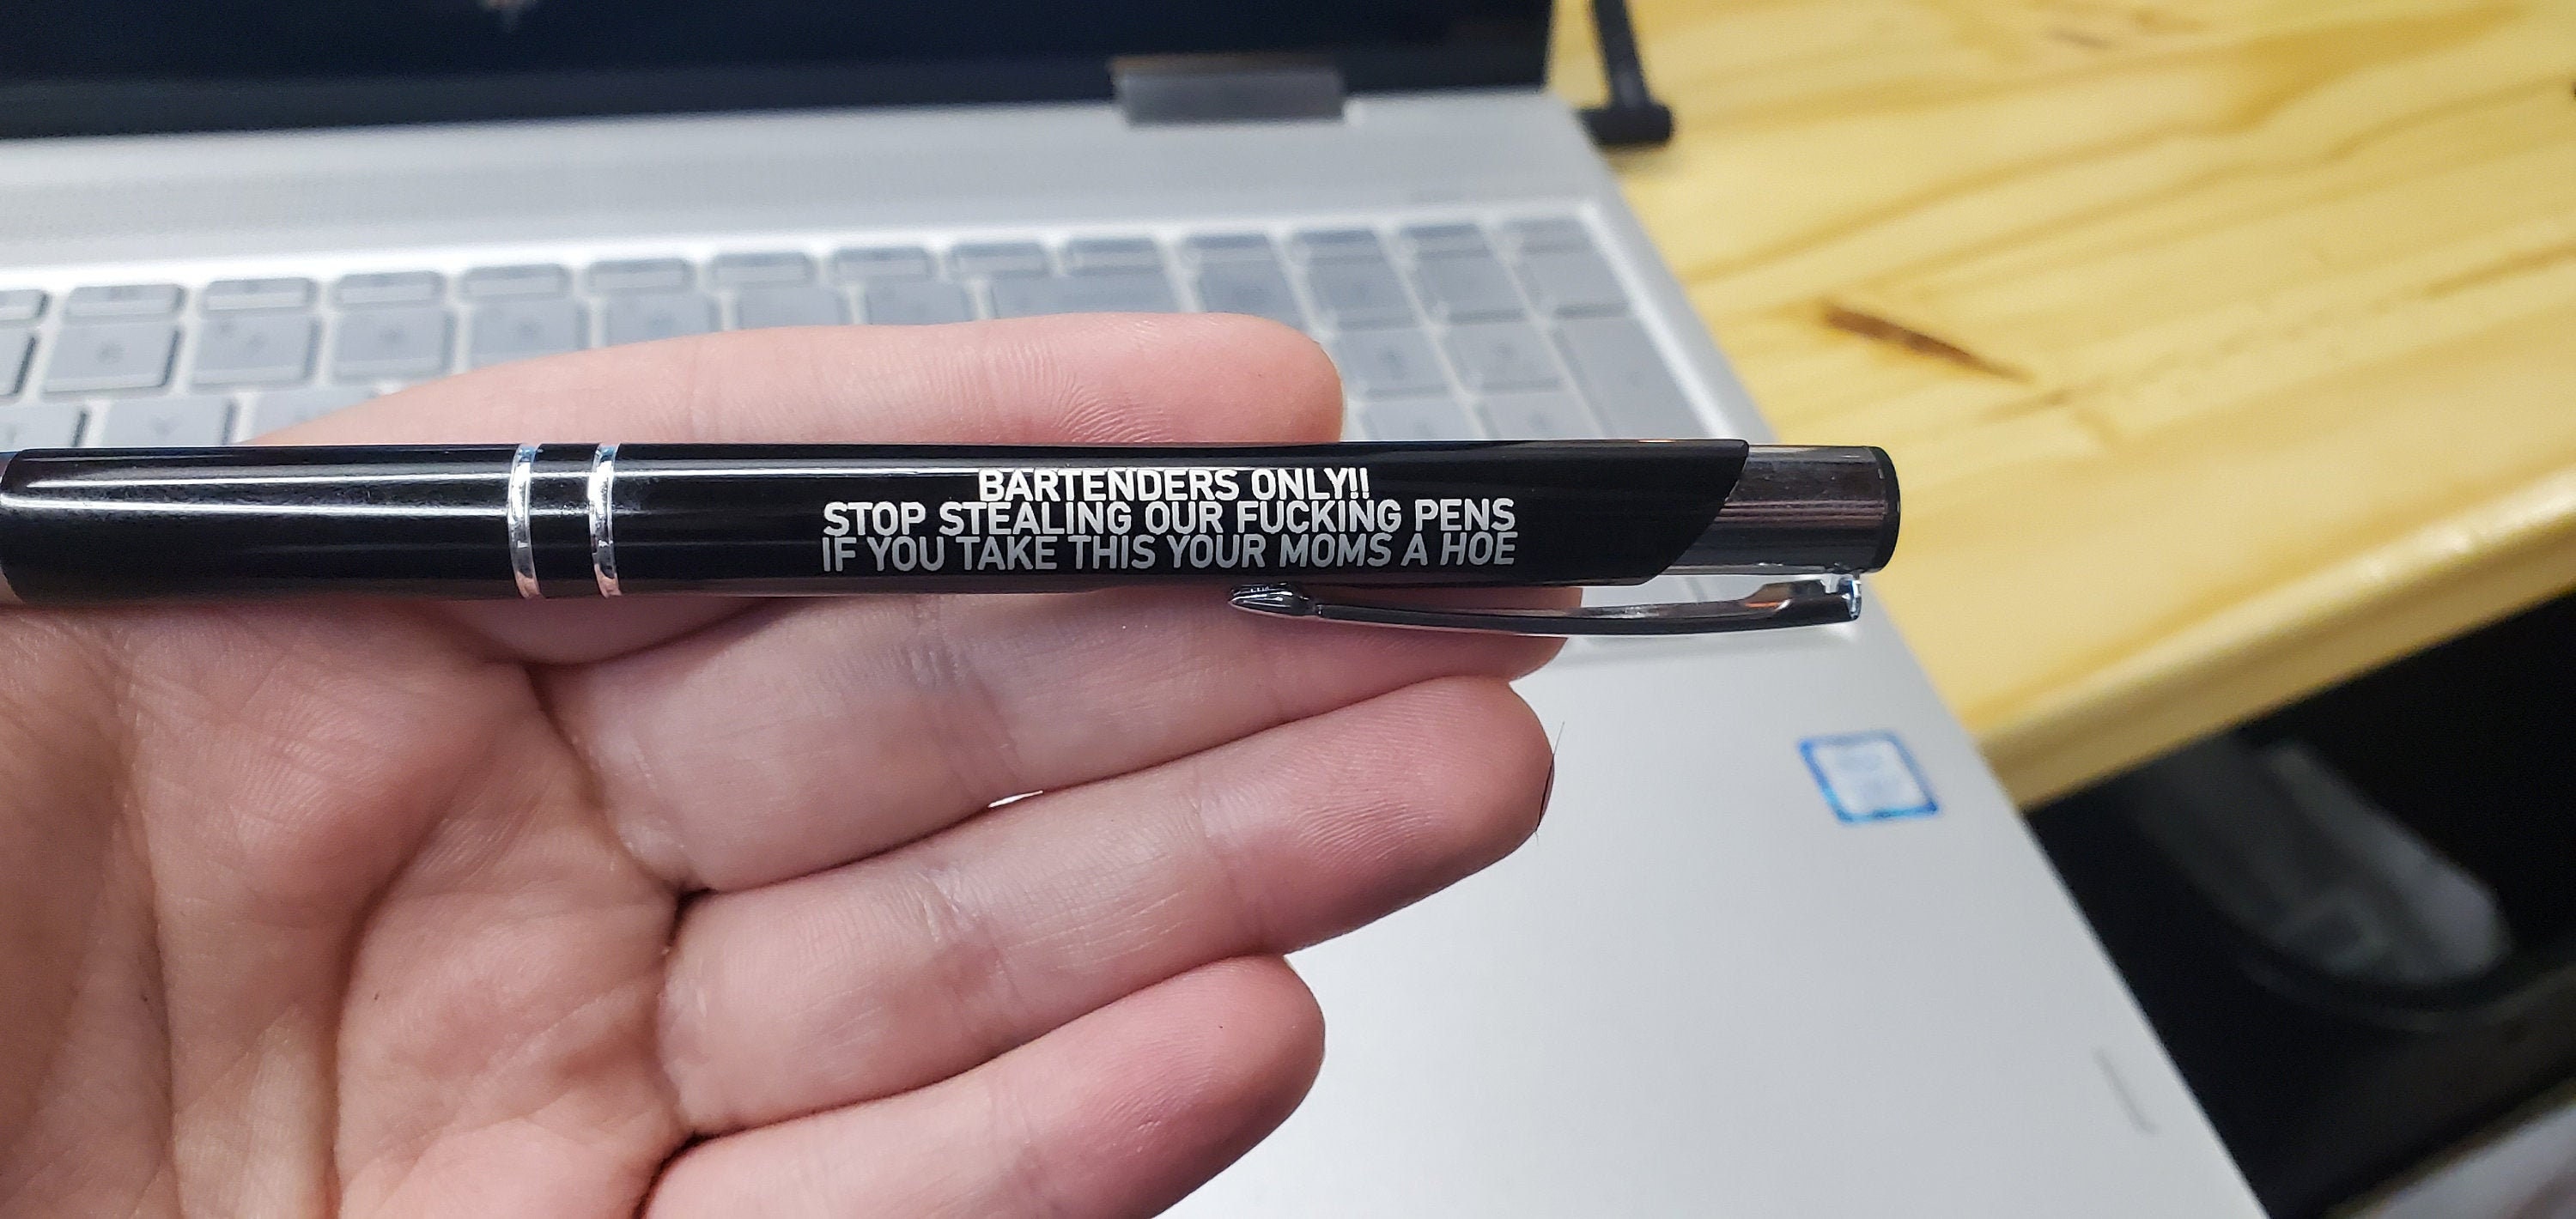 My new pen when you hit the plunger : r/oddlysatisfying